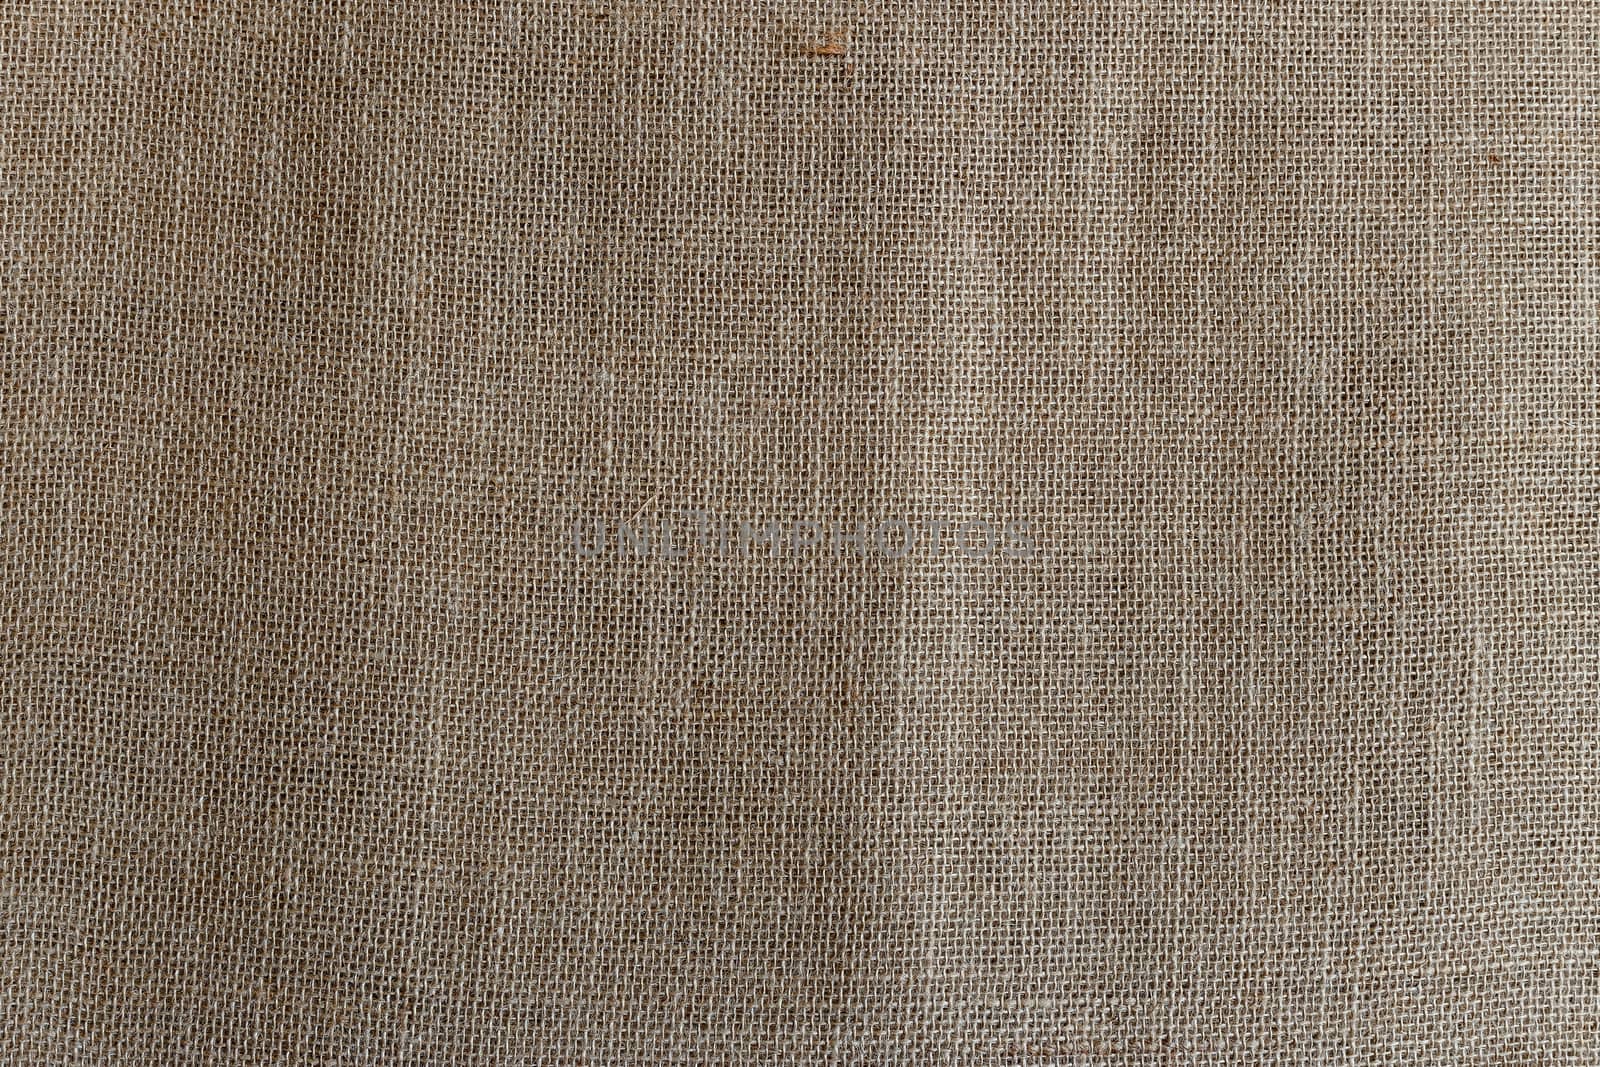 Burlap Background Texture by ires007